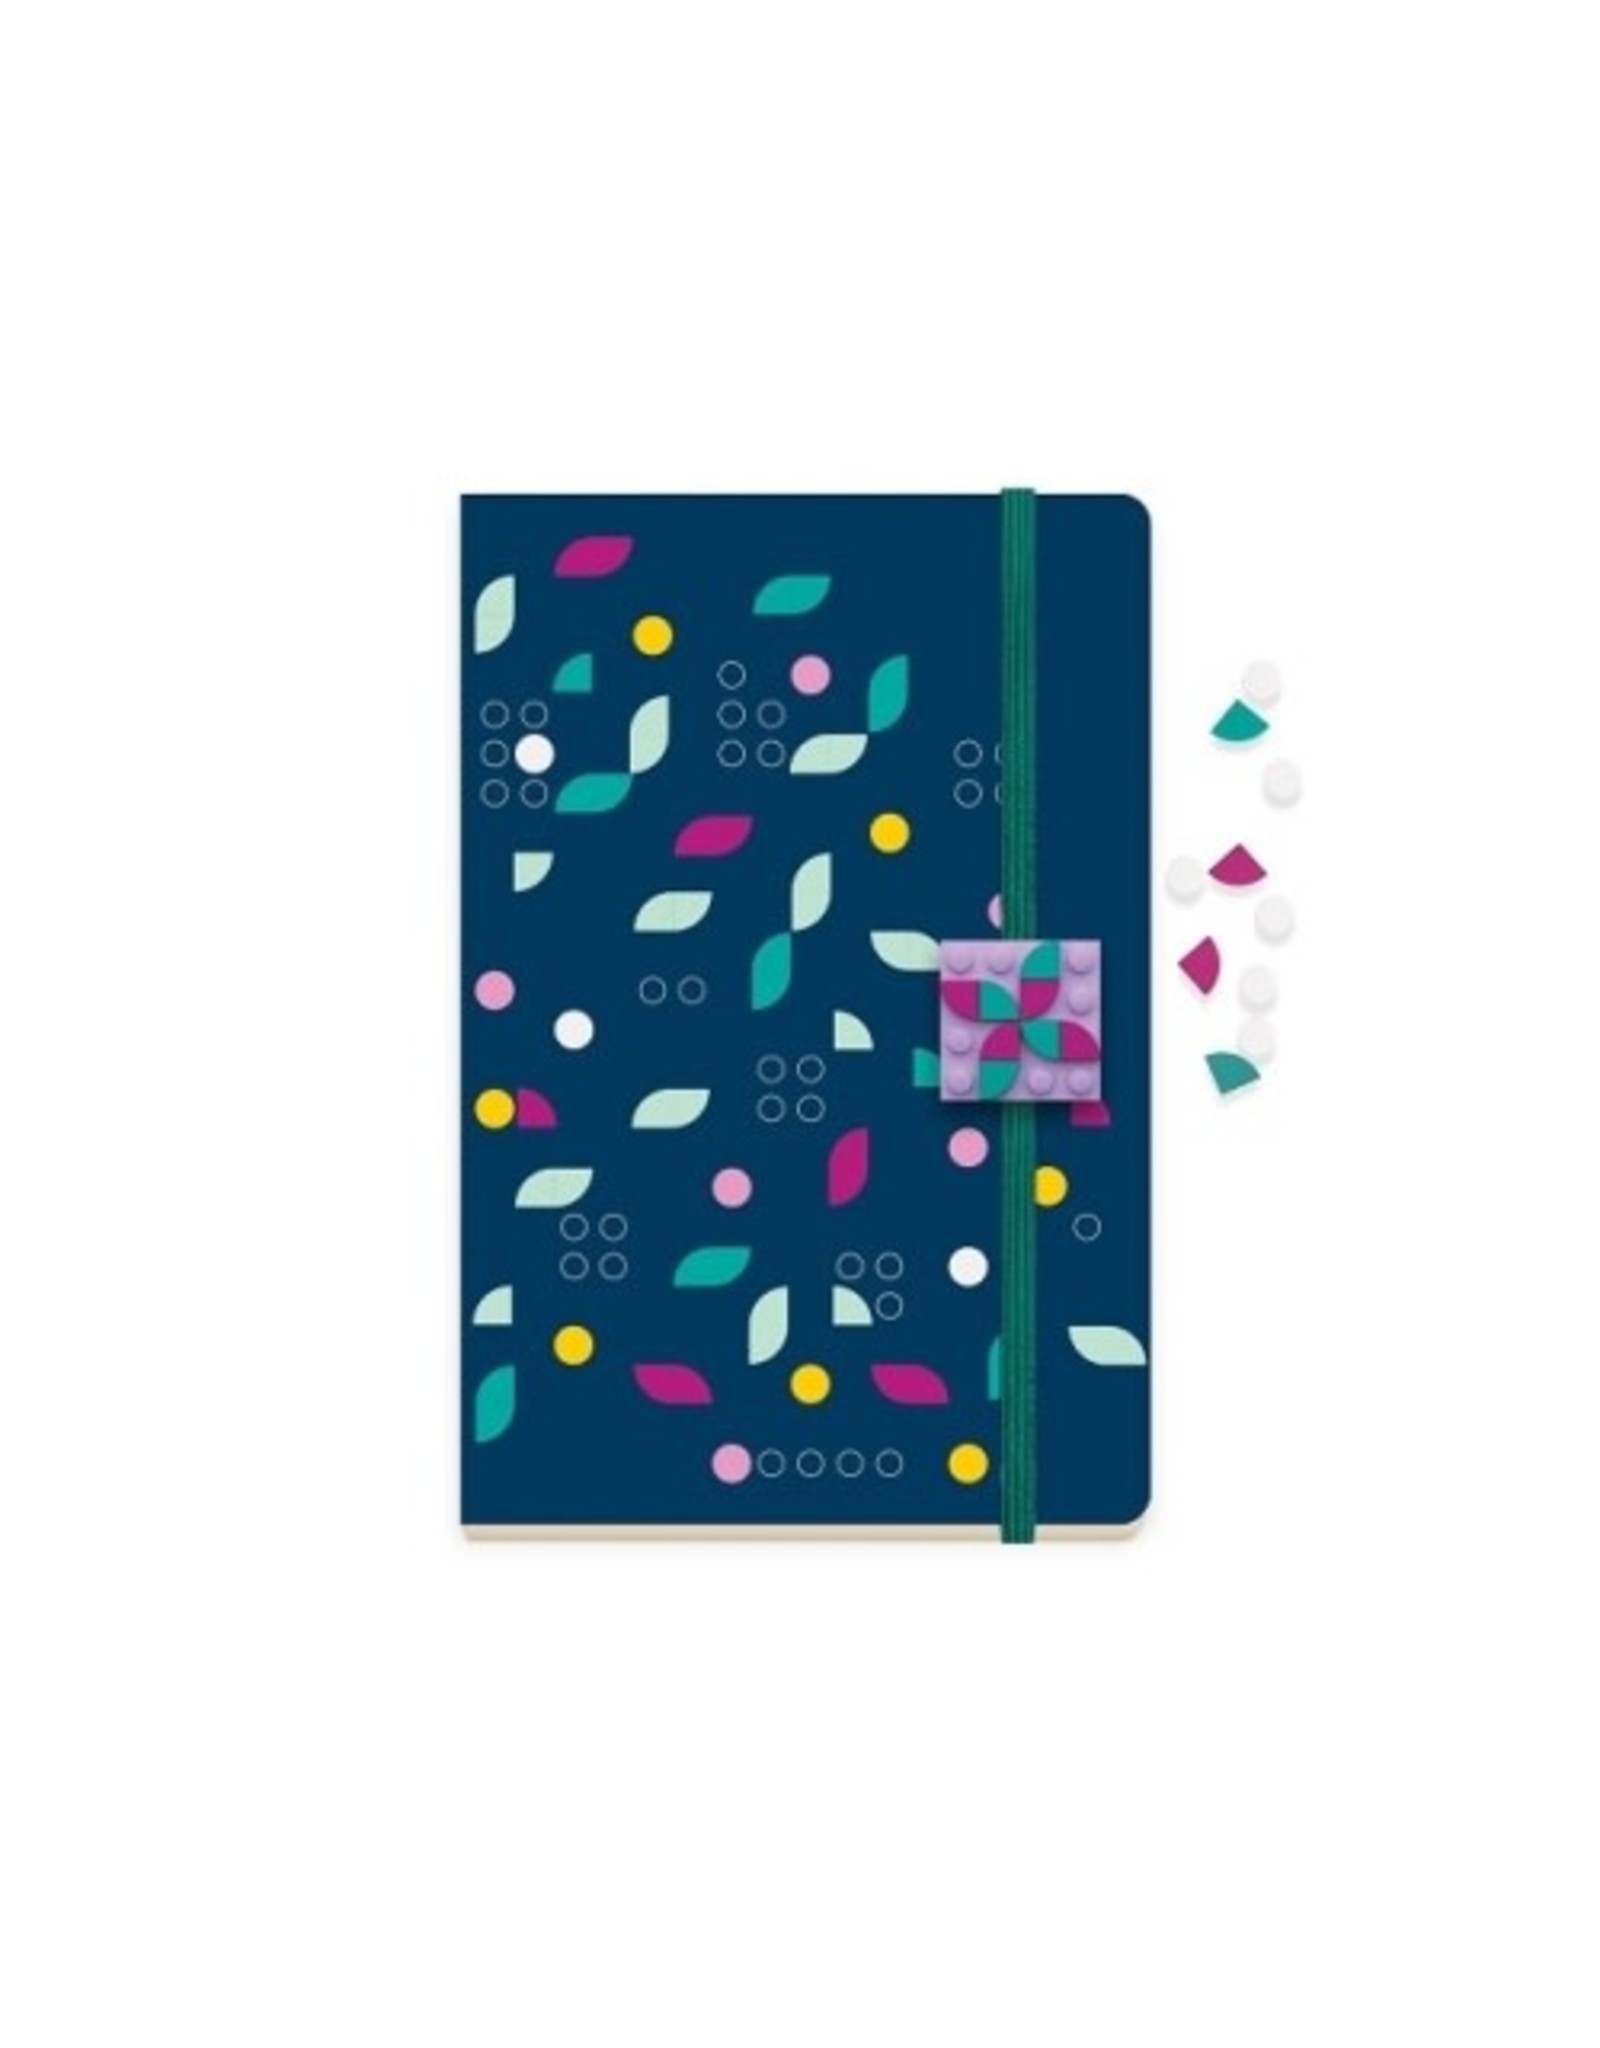 Lego DOTS notebook with charm + 18 tiles